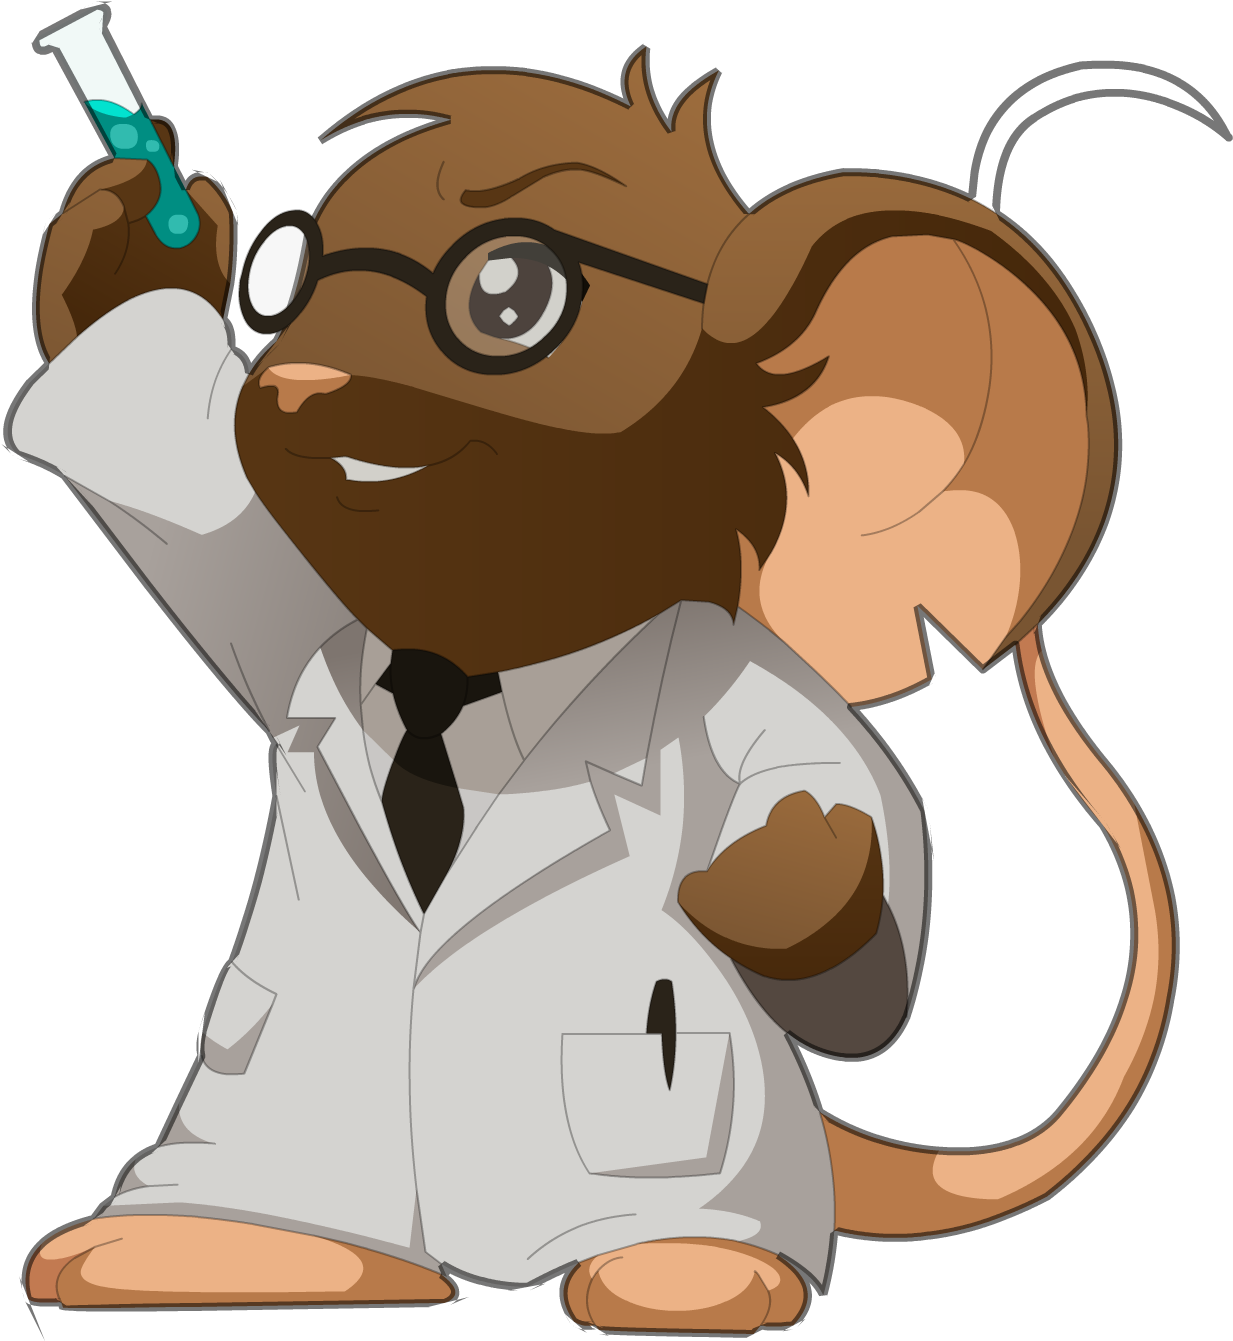 Cartoon Scientist Mouse Holding Test Tube